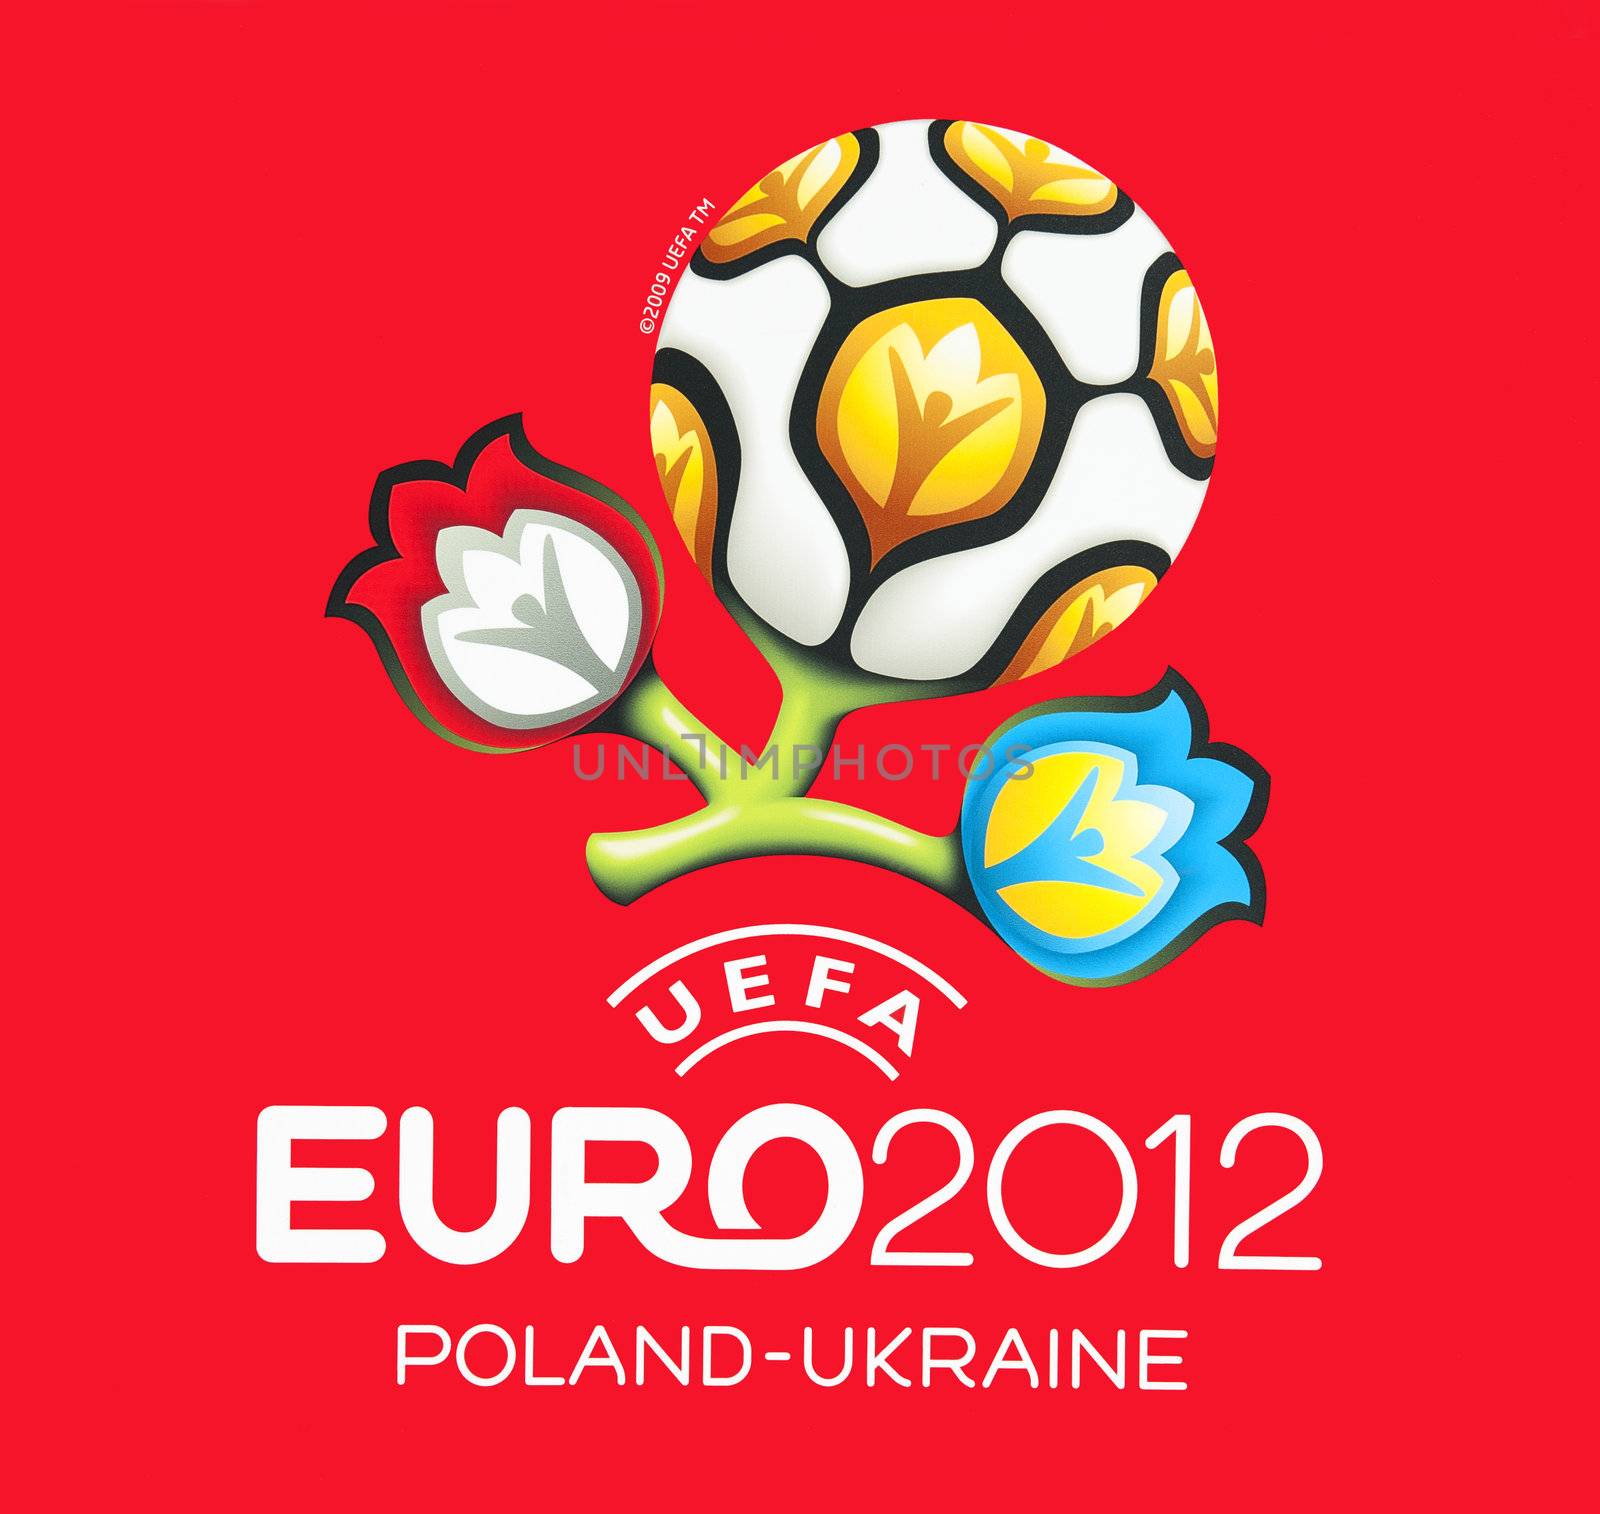 Official logo for UEFA EURO 2012 by Yaurinko